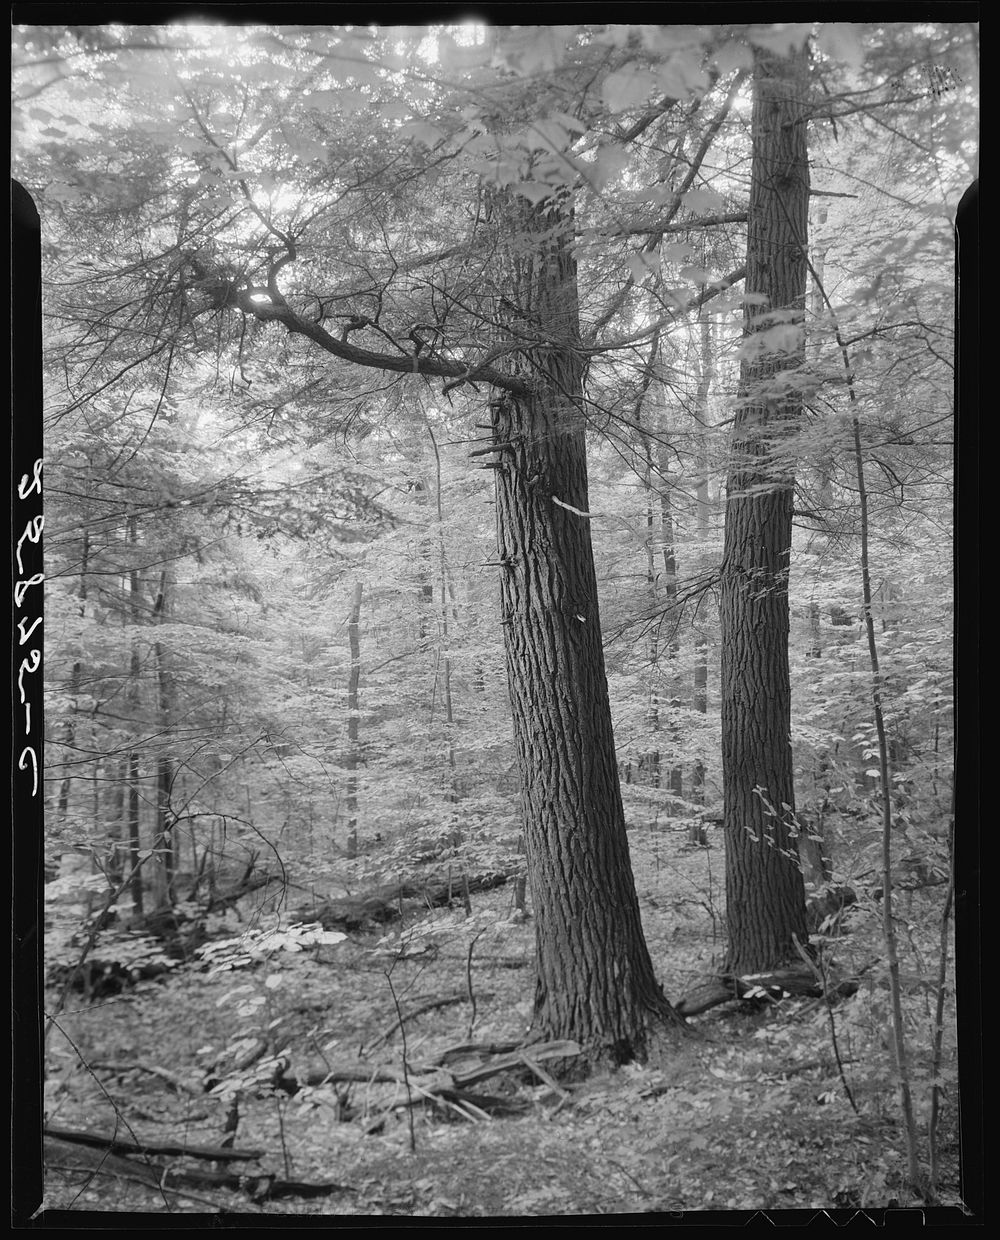 Large trees found in the Otsego County forest area. New York. Sourced from the Library of Congress.